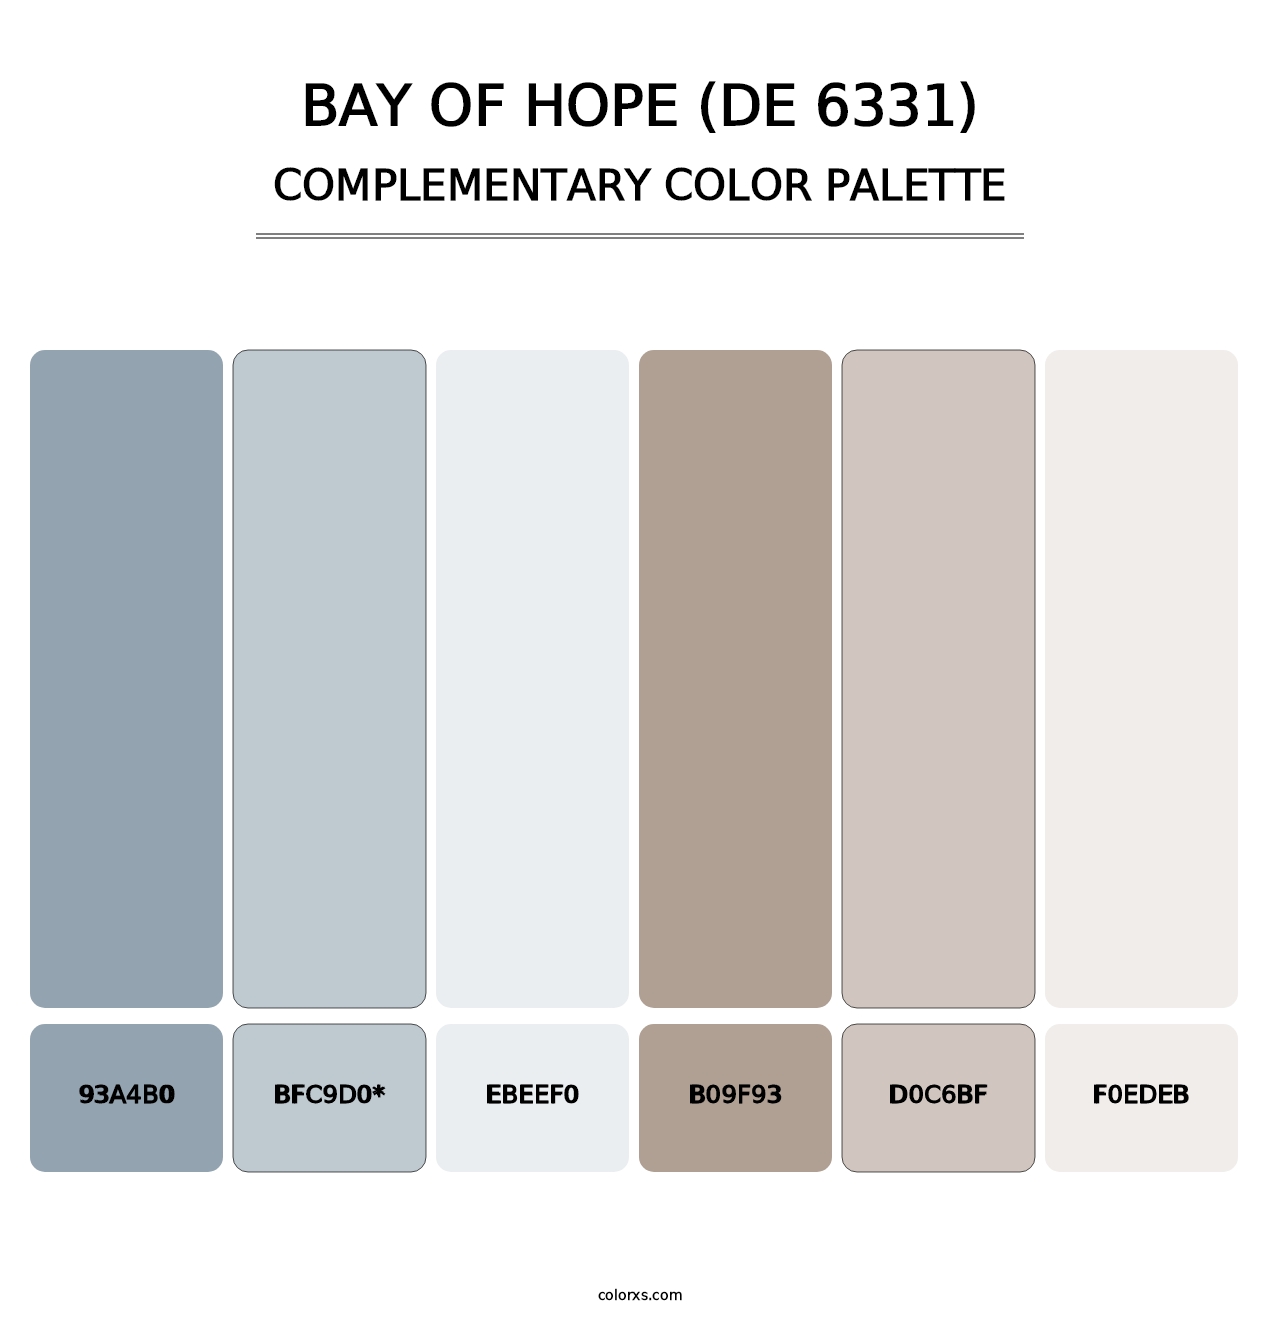 Bay of Hope (DE 6331) - Complementary Color Palette